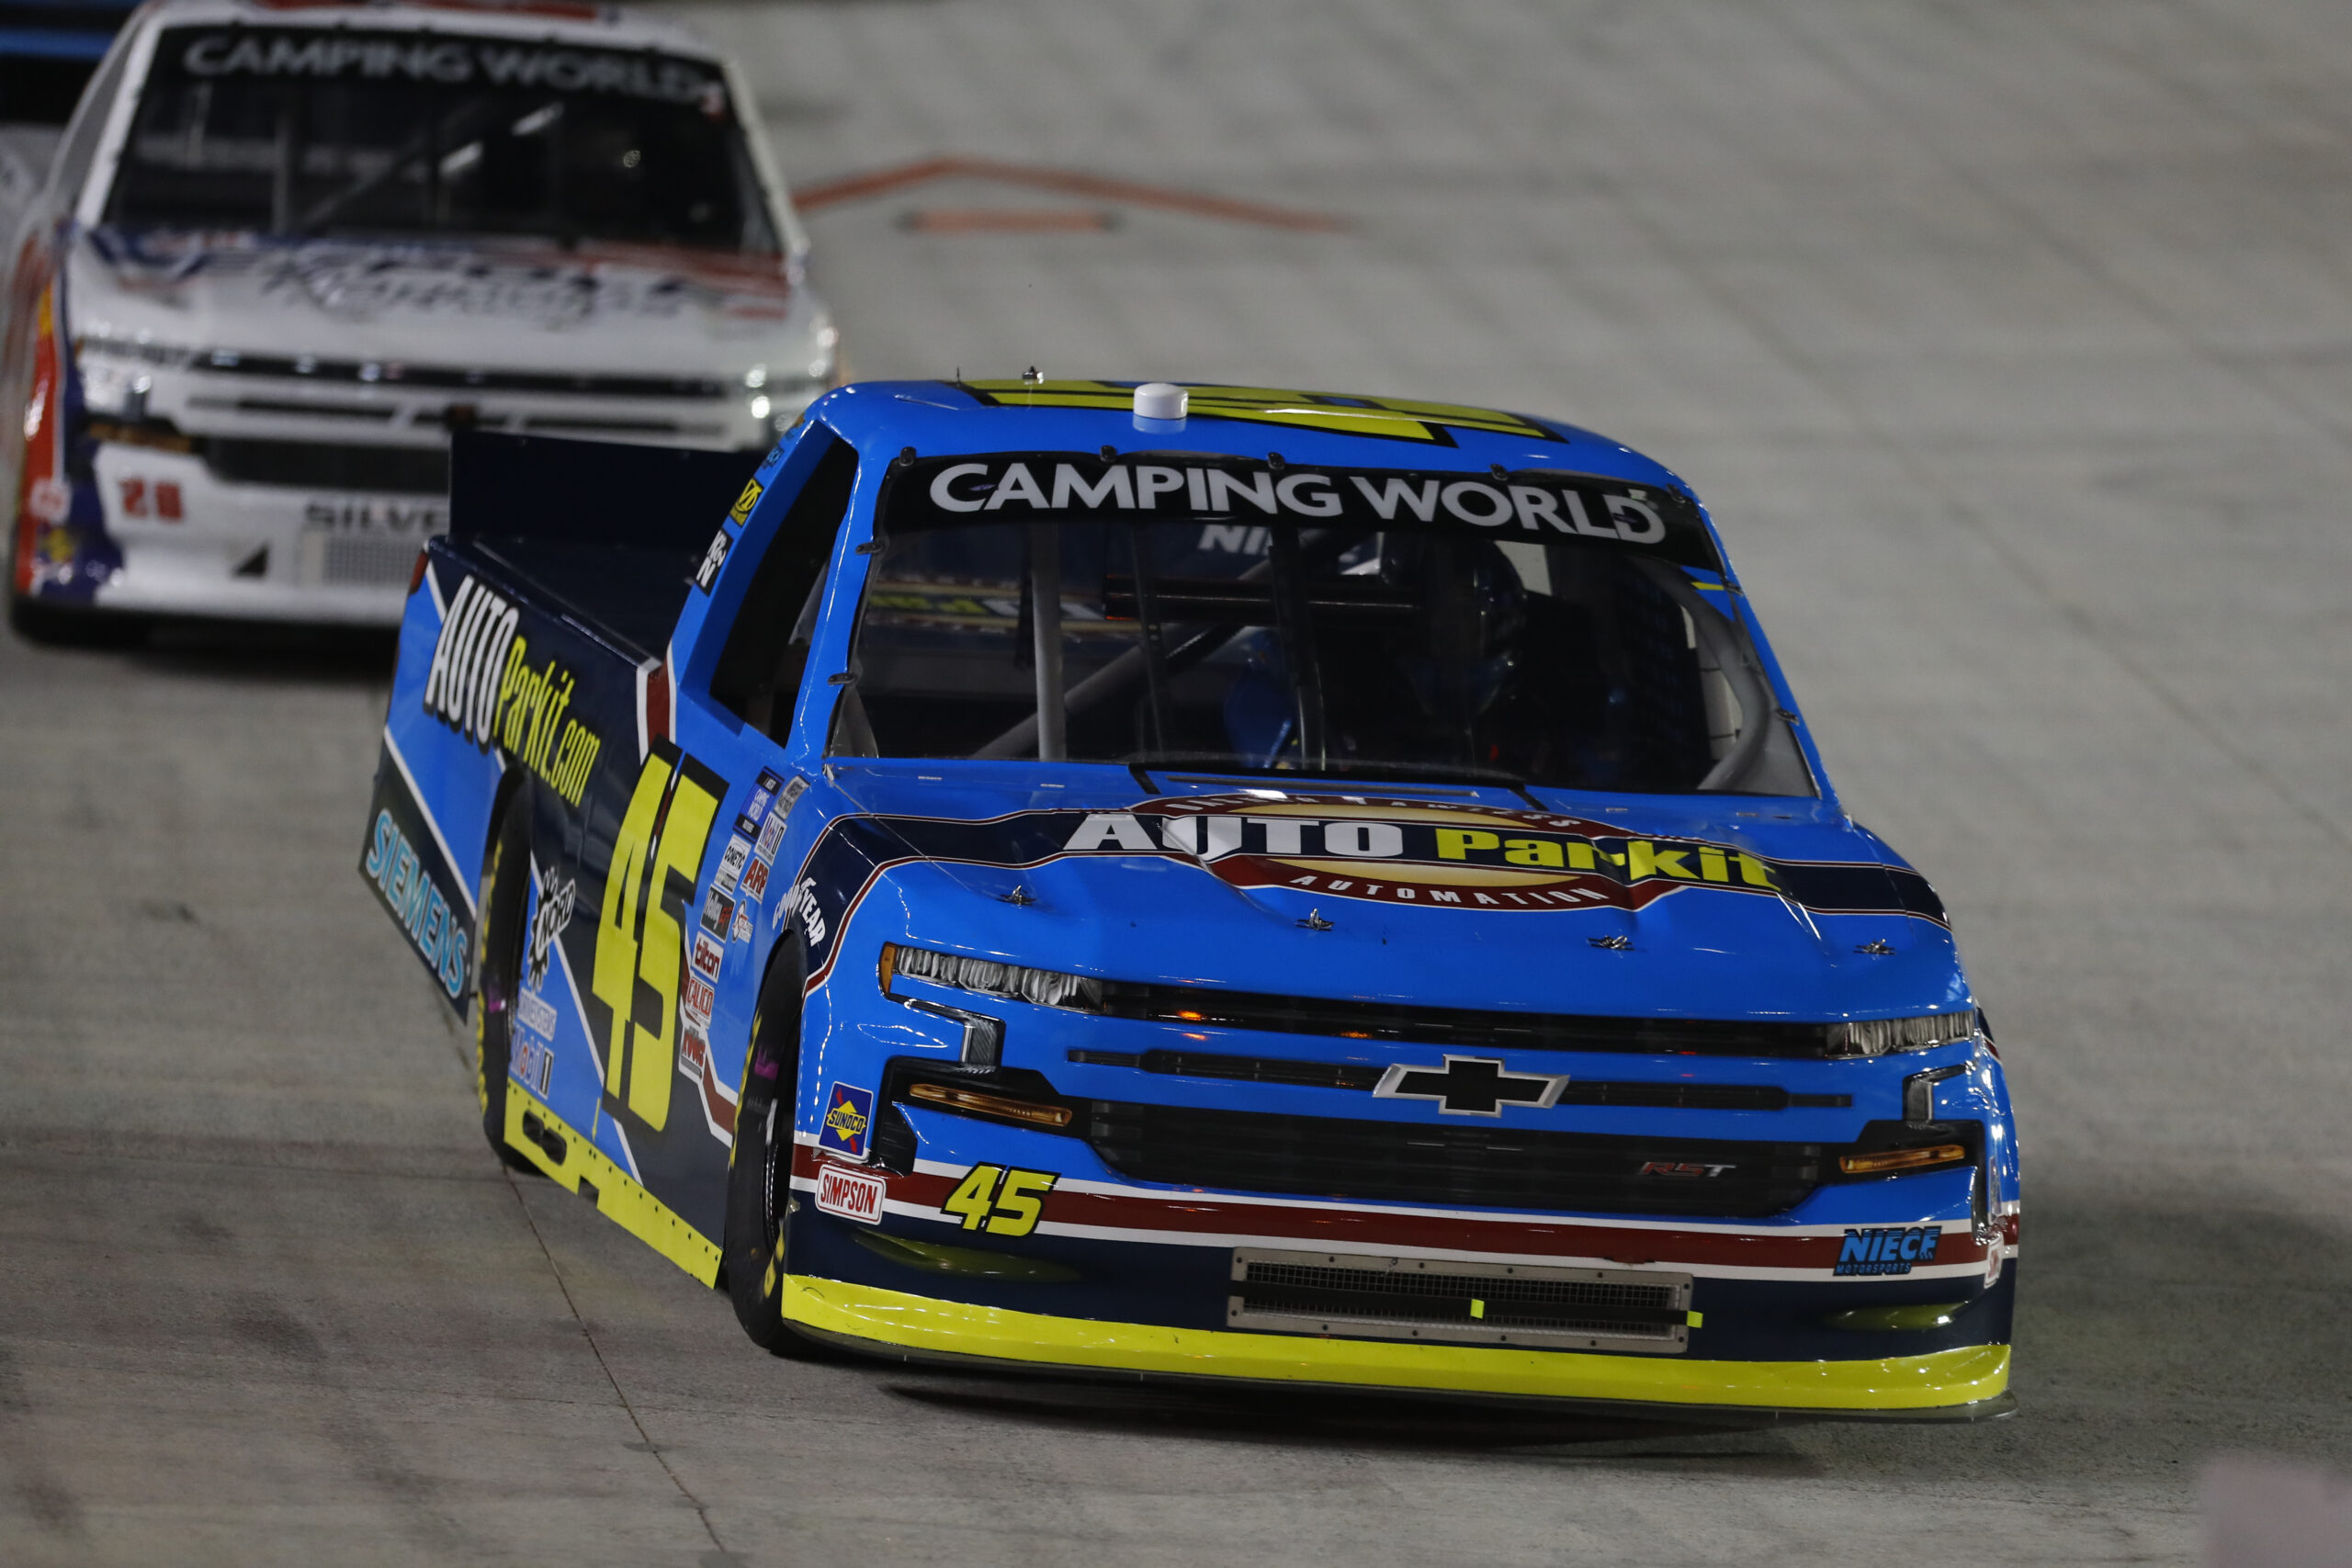 NASCAR 2021: NASCAR Camping World Truck Series UNOH 200 presented by Ohio Logistics September 16